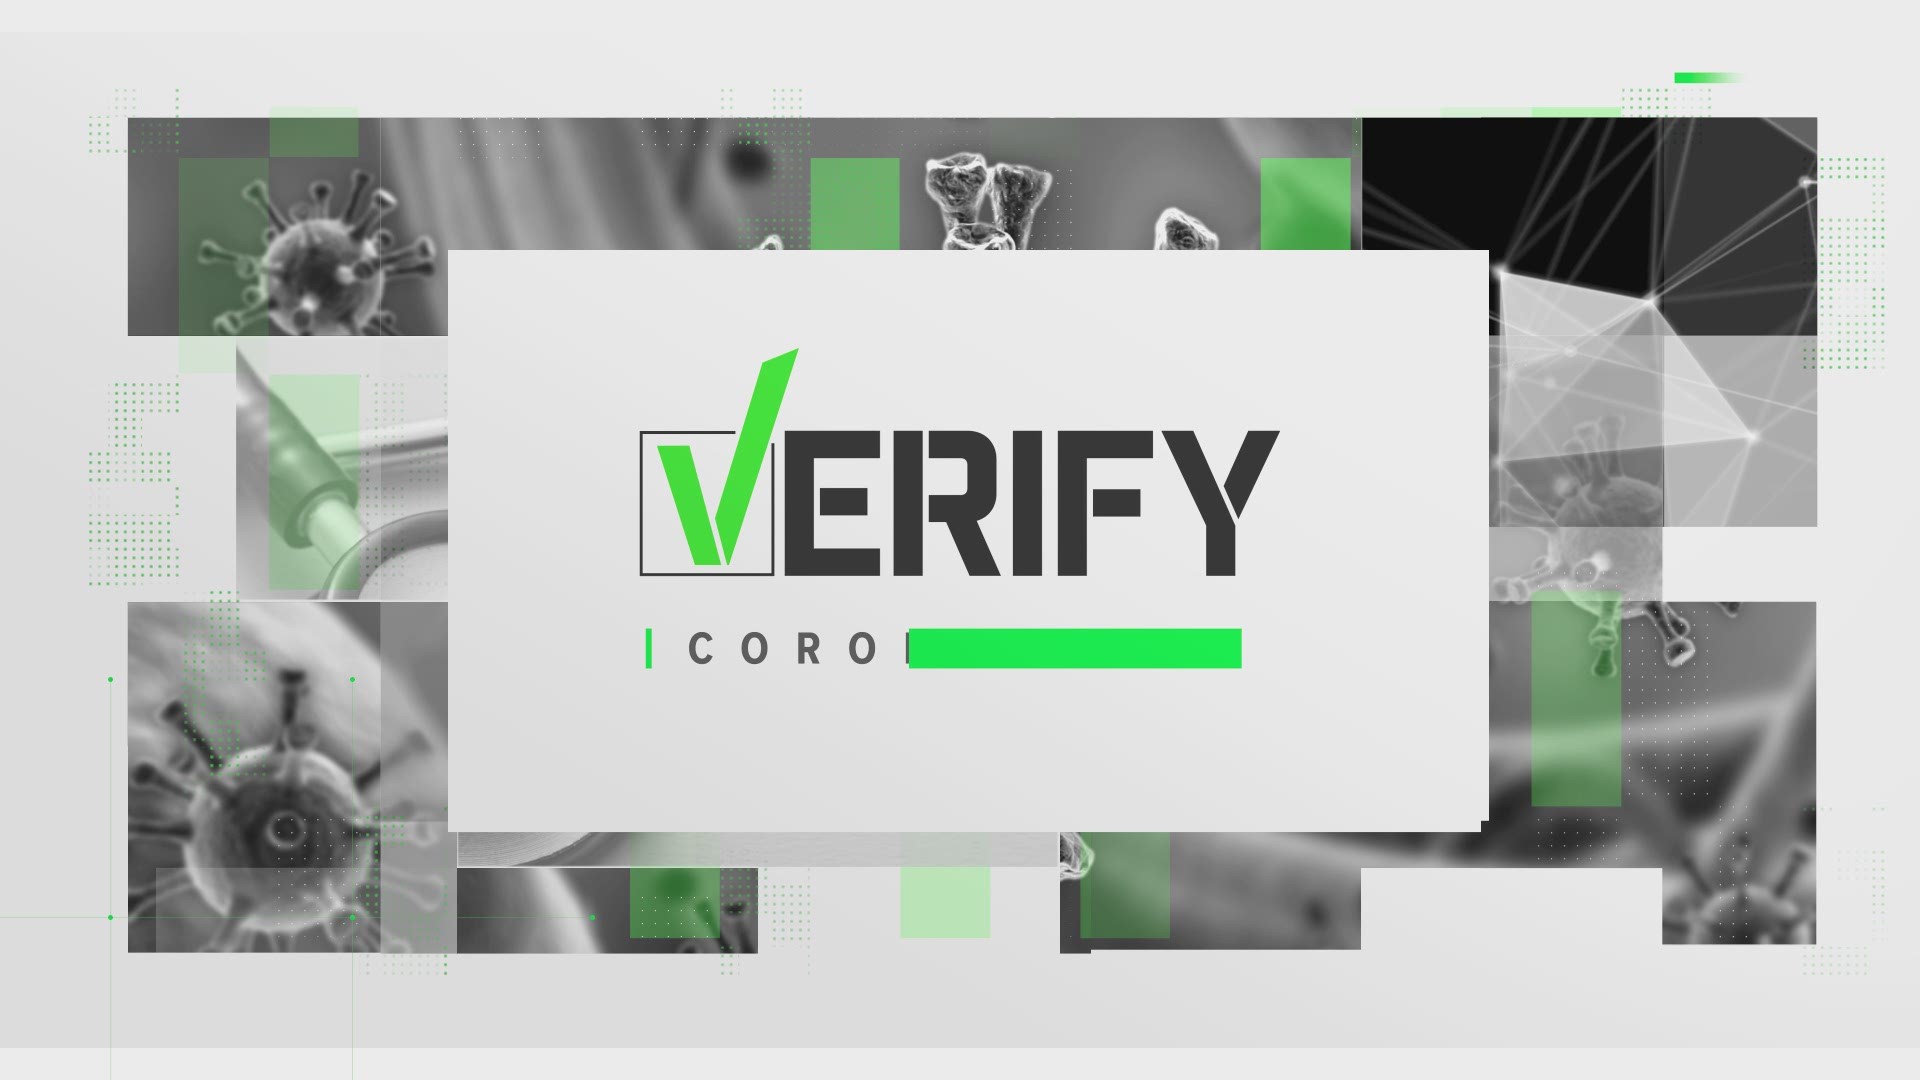 As economies start to open up, the Verify Team is tackling a question about whether employers can mandate COVID-19 testing before employees return.